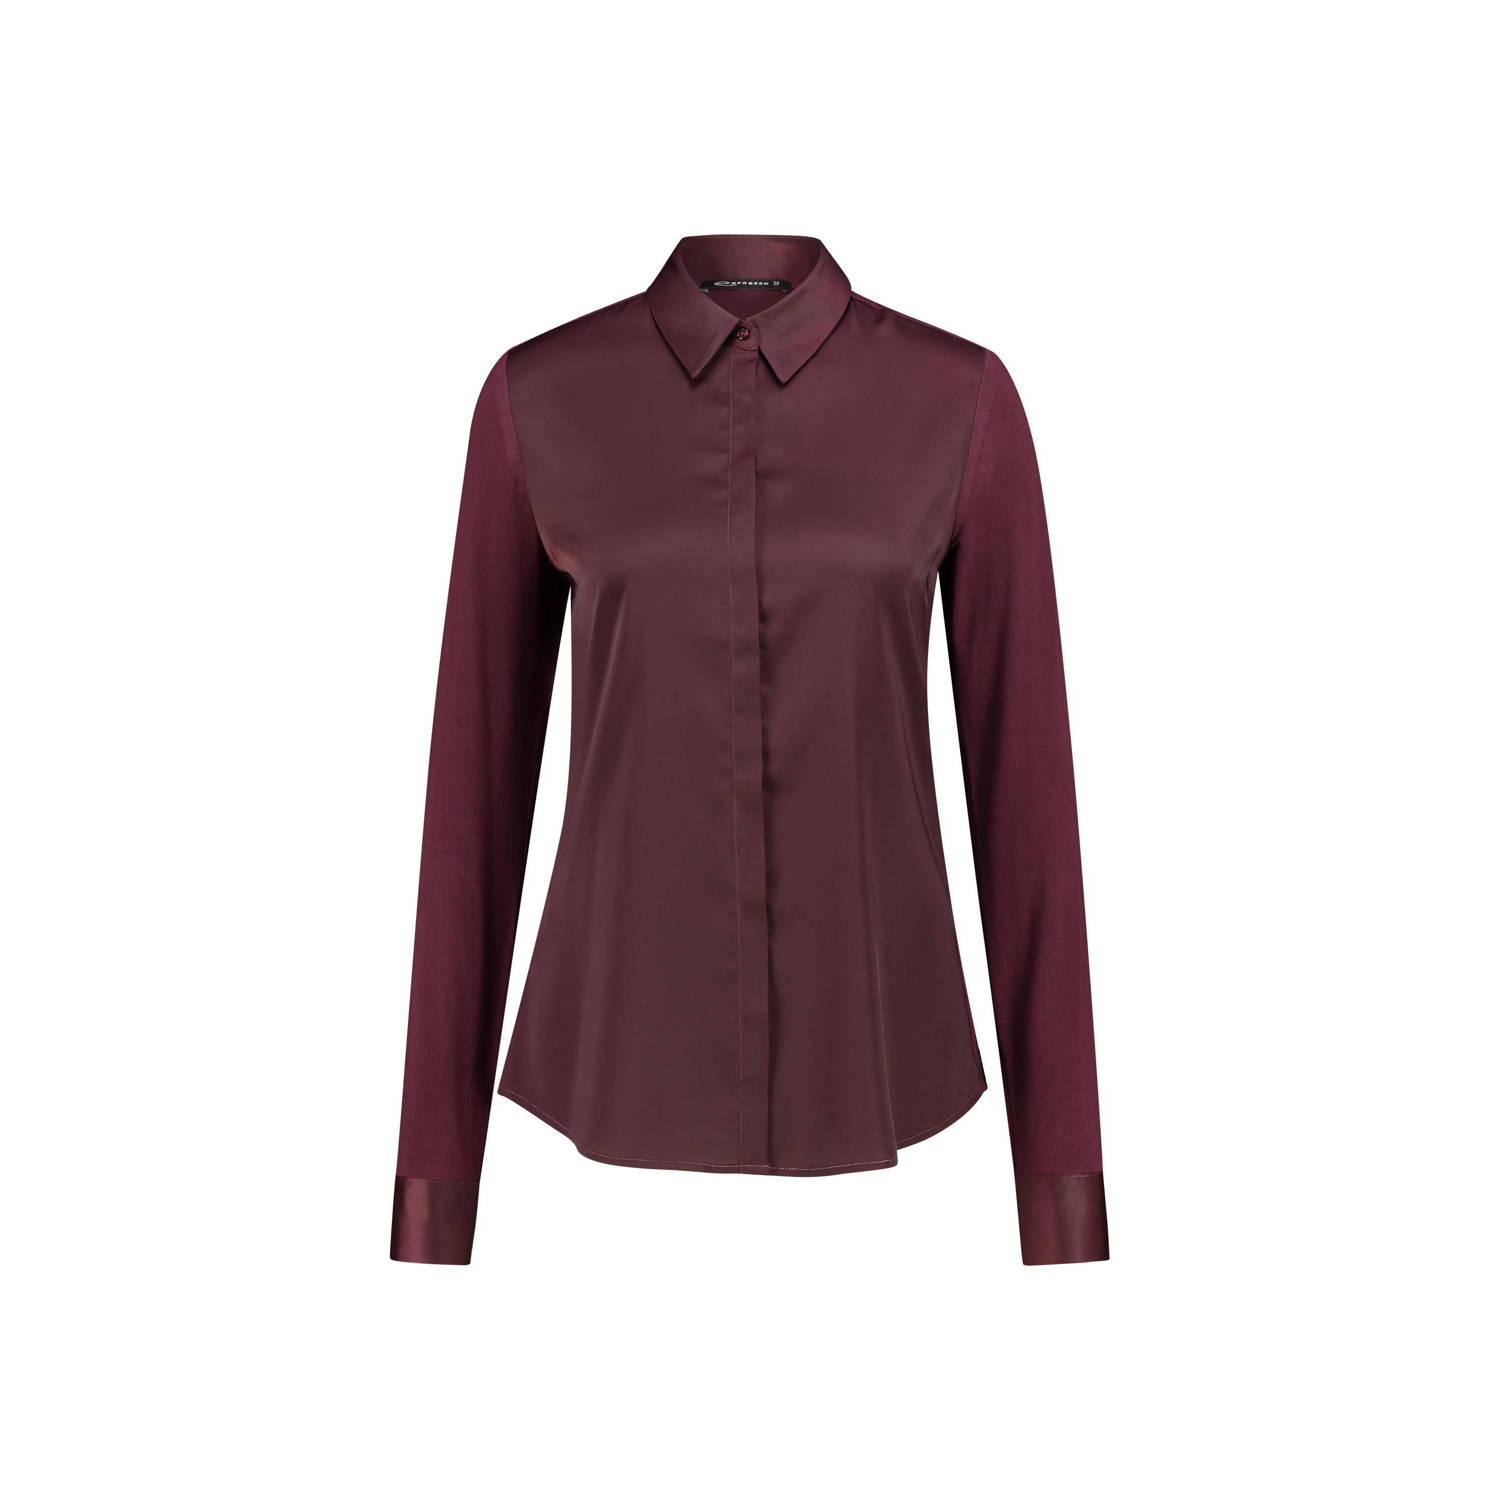 Expresso blouse rood